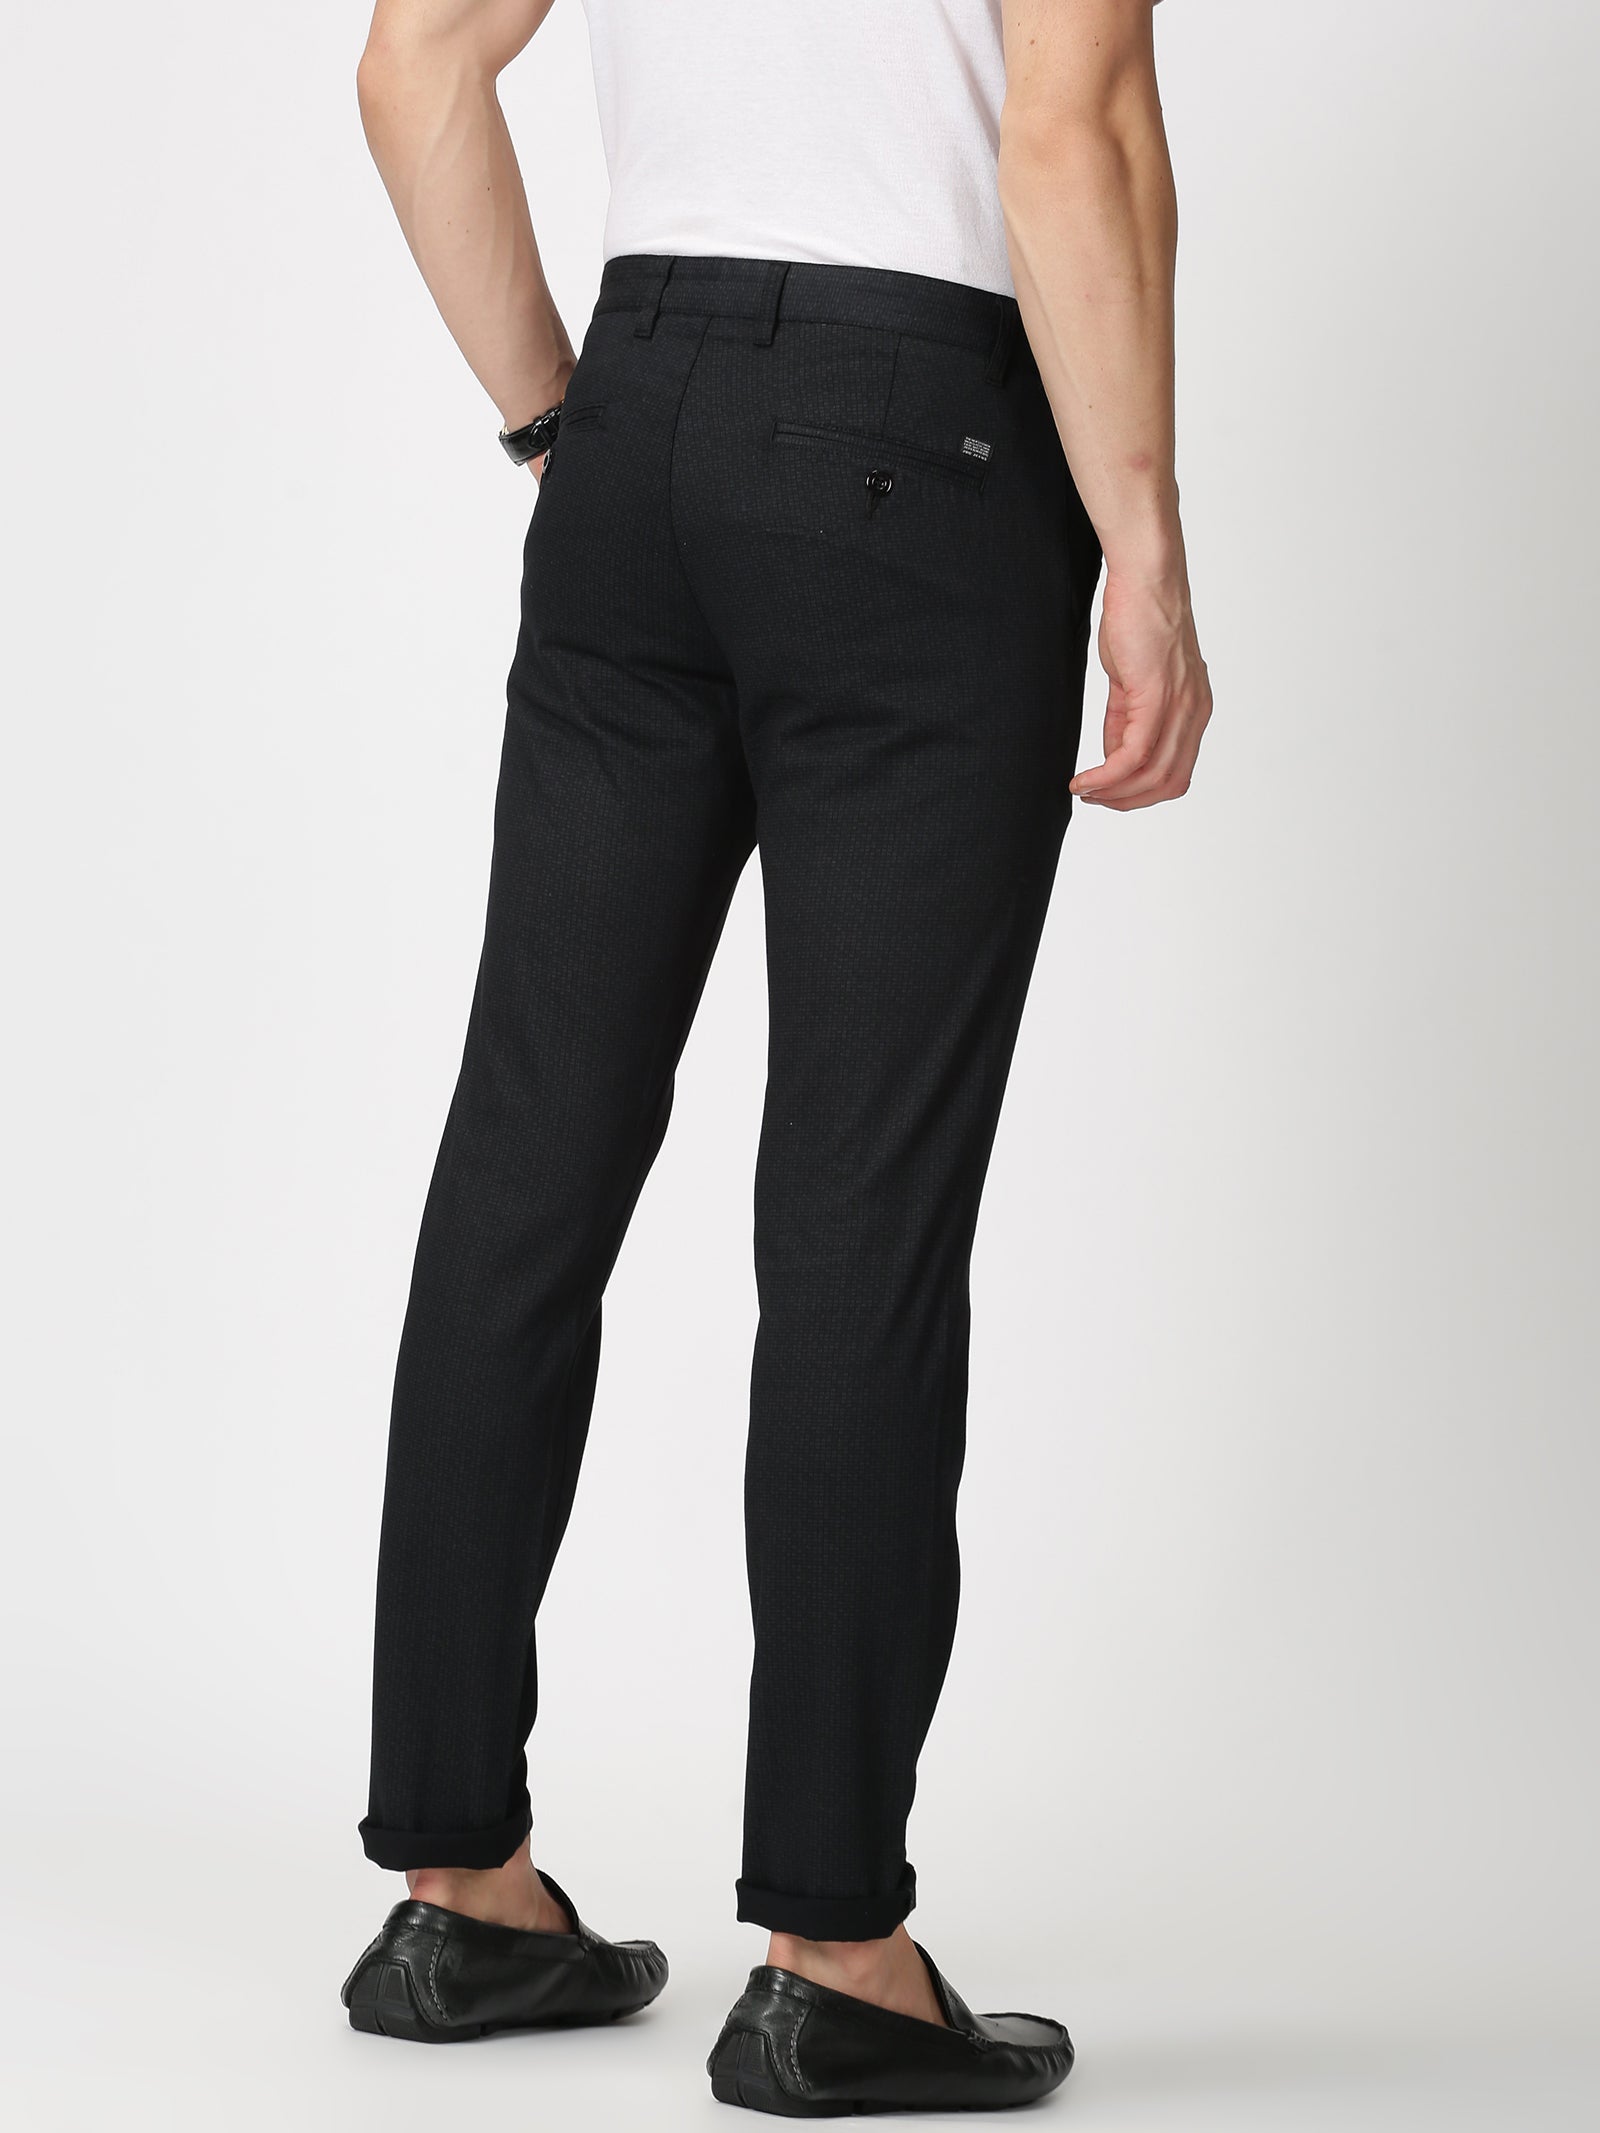 Mens Slim Fit Solid Trousers  Black  Benetton